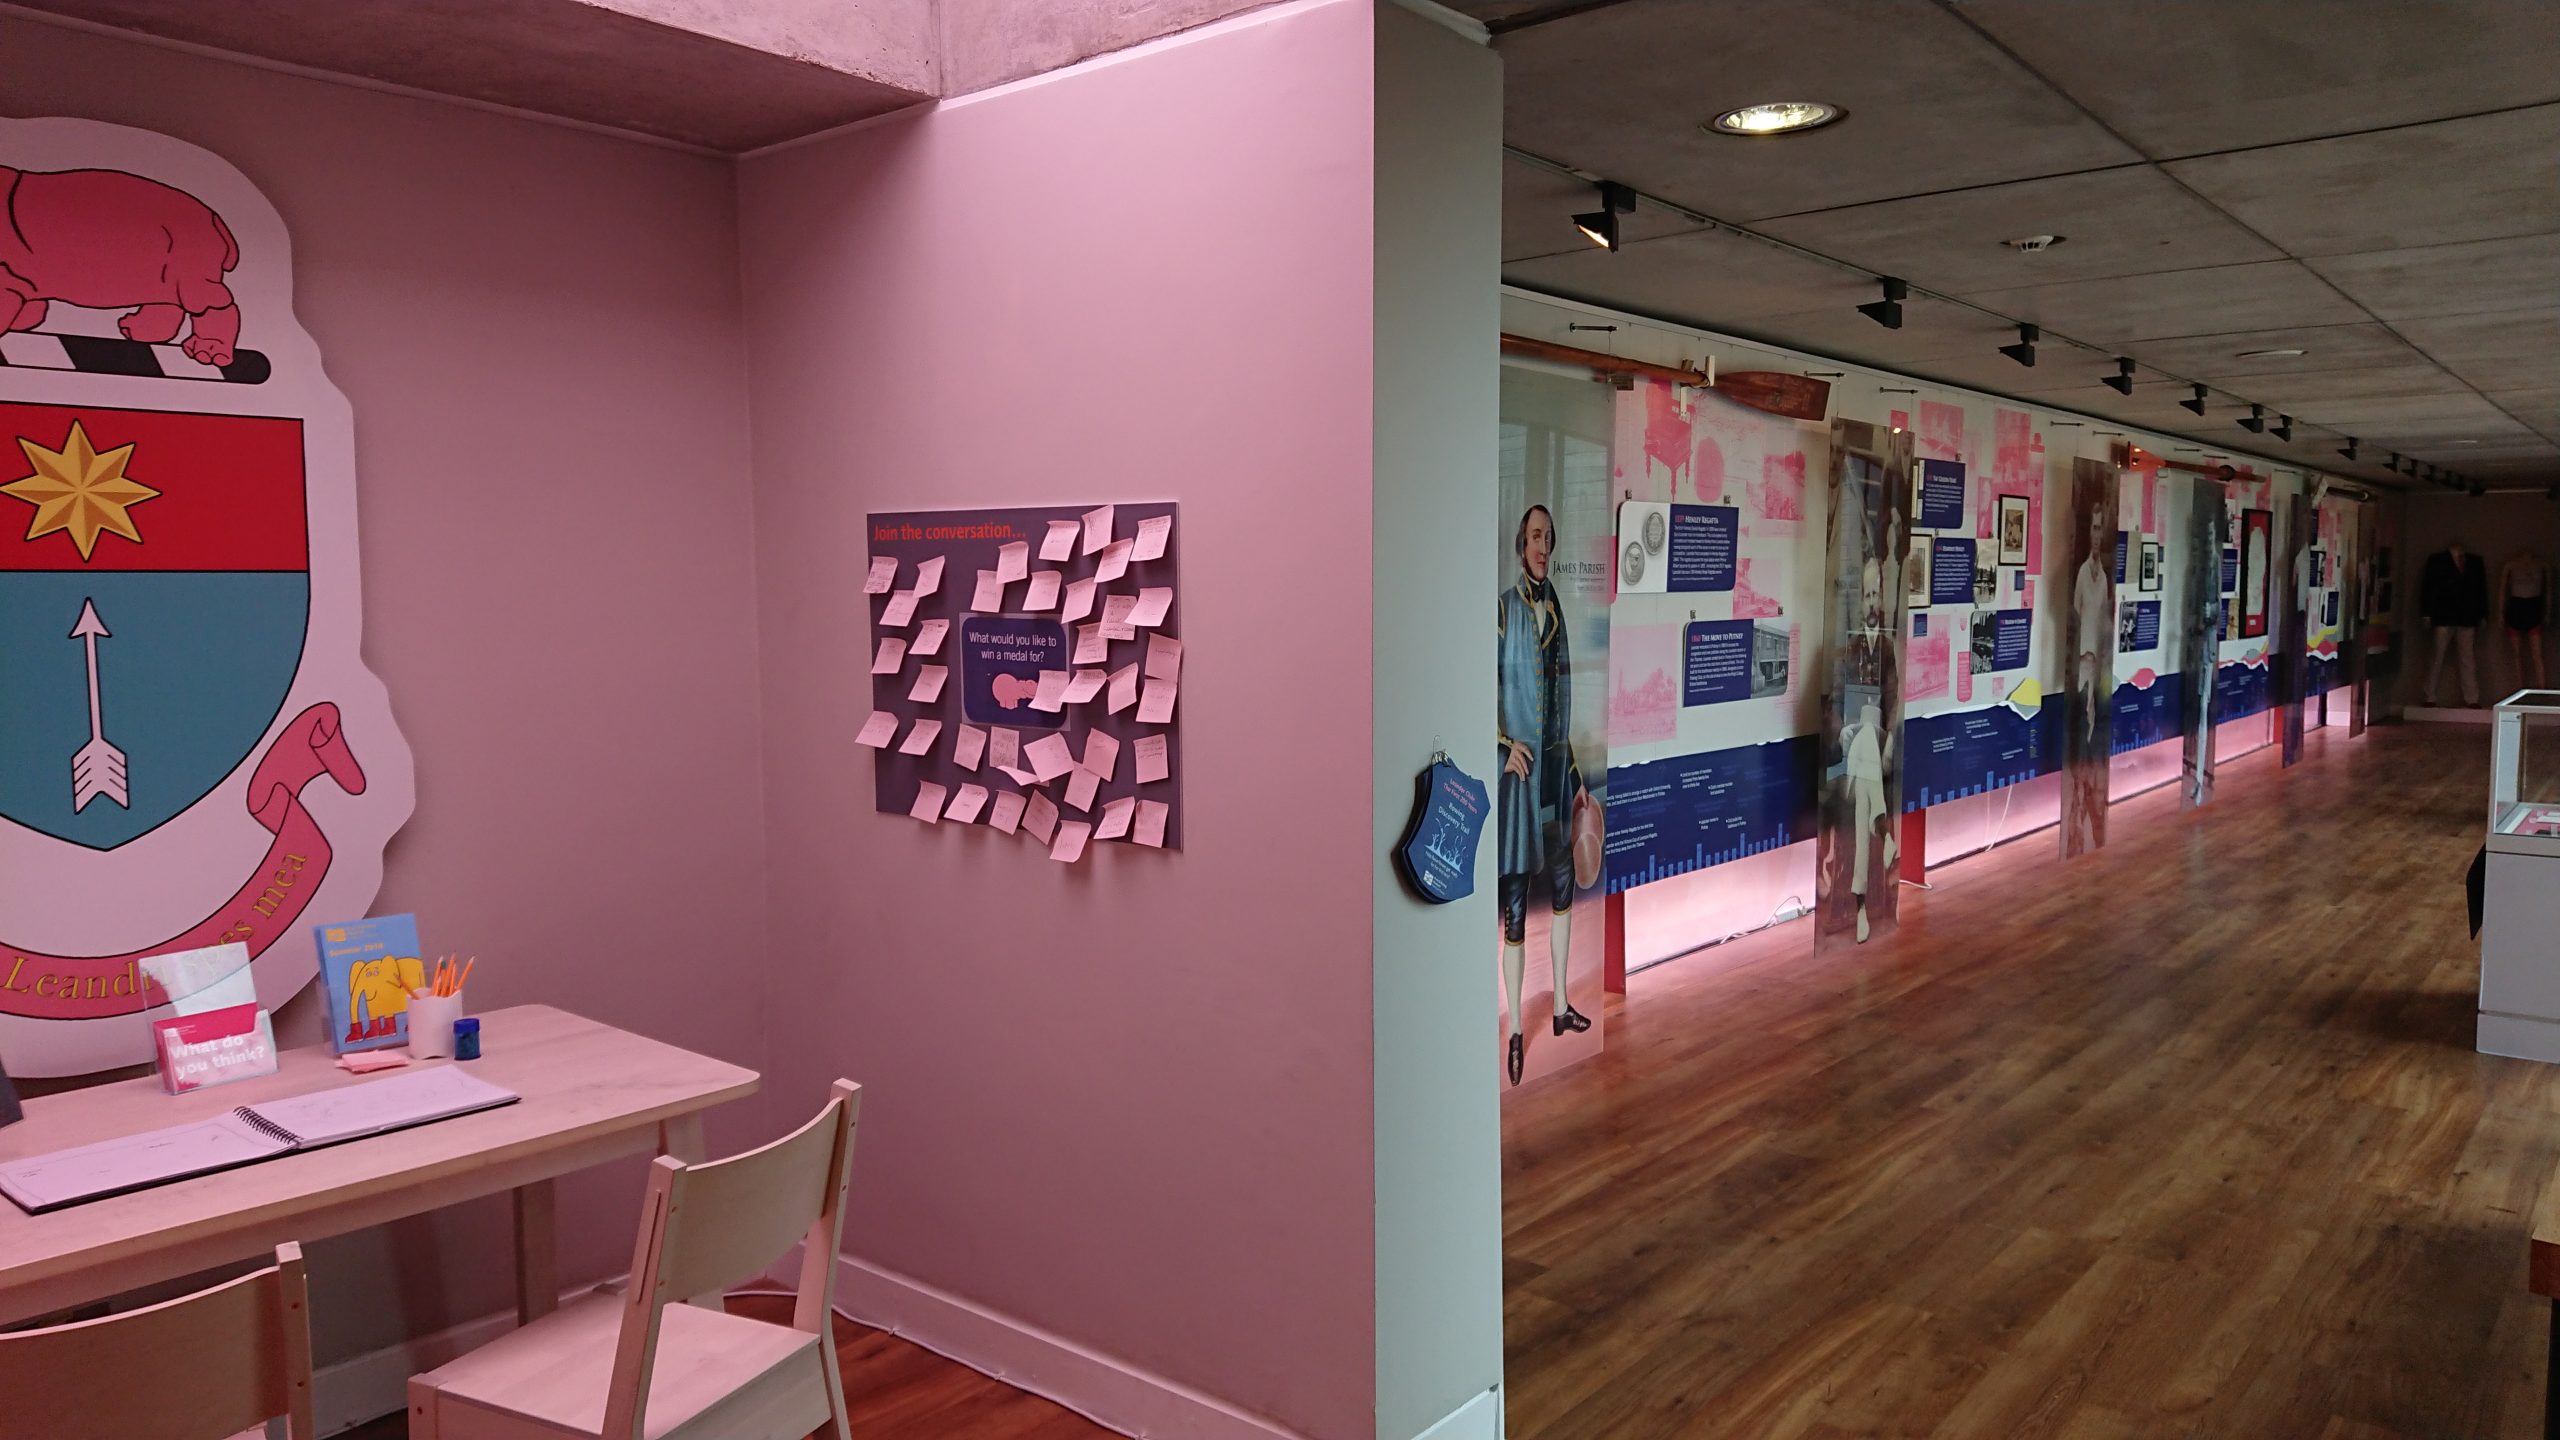 A view down the Community Gallery with a display in pink and navy all about Leander Rowing Club. Life-sized models of rowers are shown alongside trophies in display cases and information on the club. In the foreground is a table and chairs with a comments board.